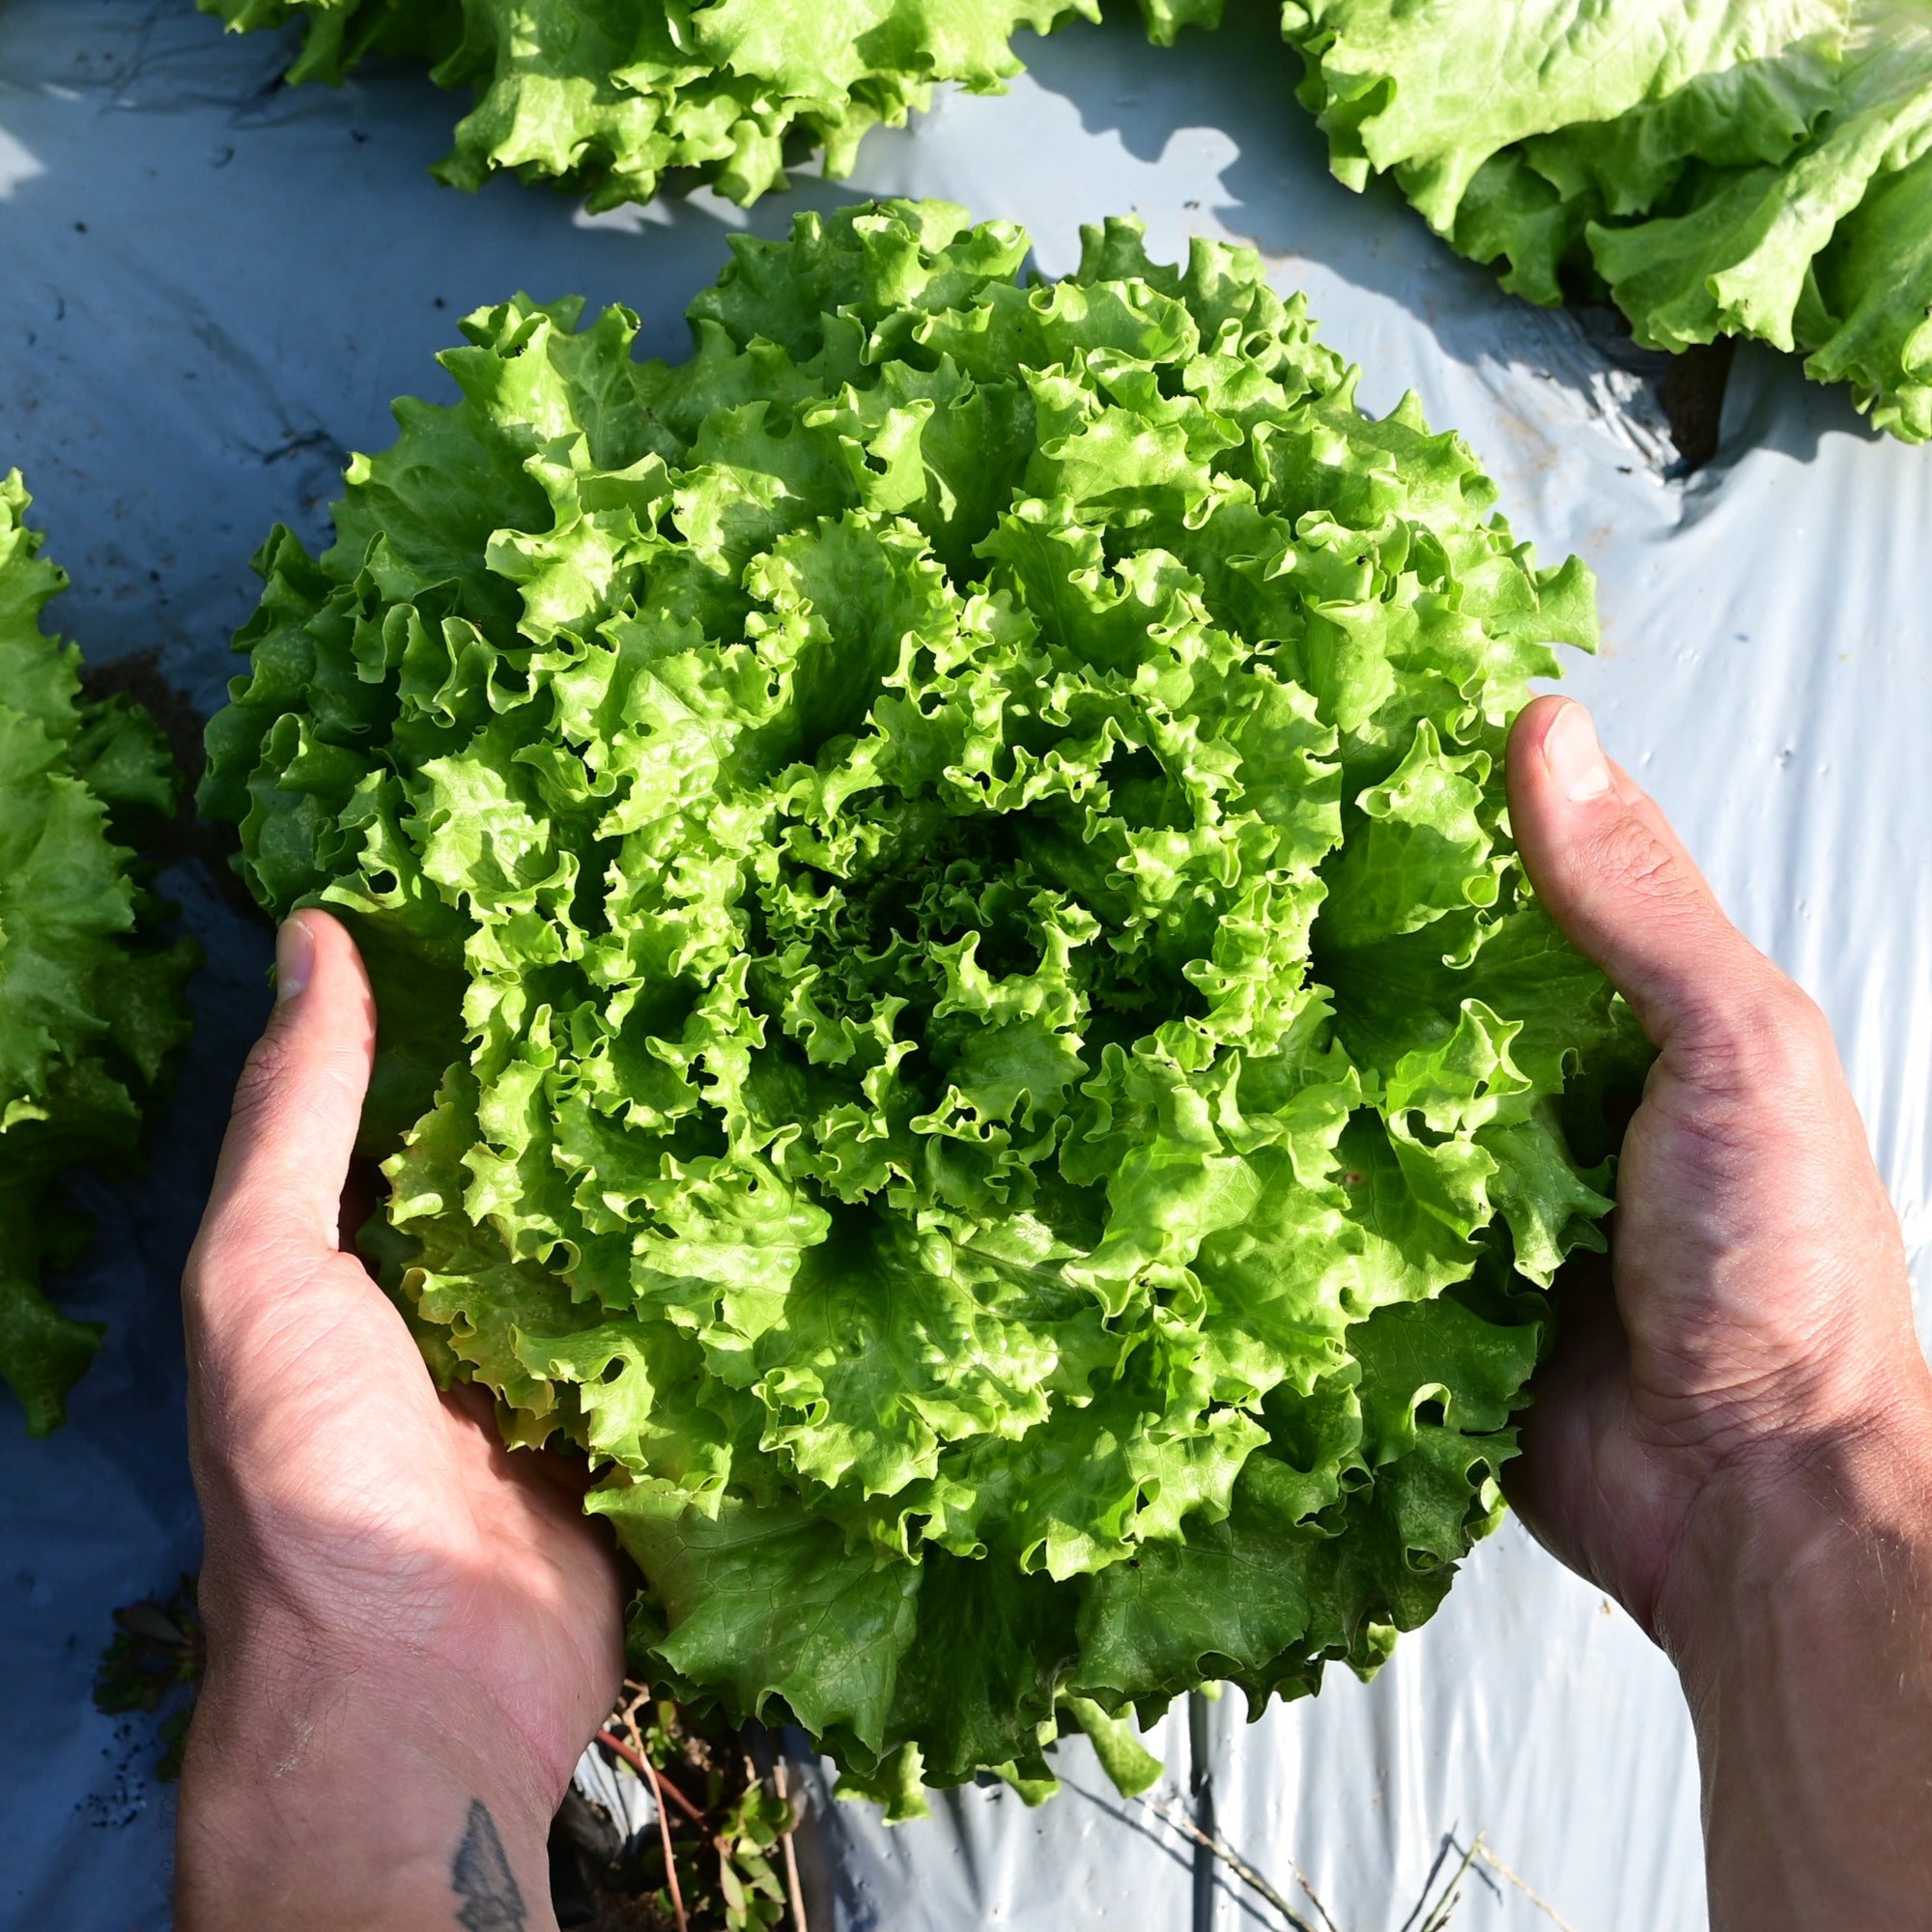 A head of muir green leaf lettuce in the garden against a white mulch background held by two hands